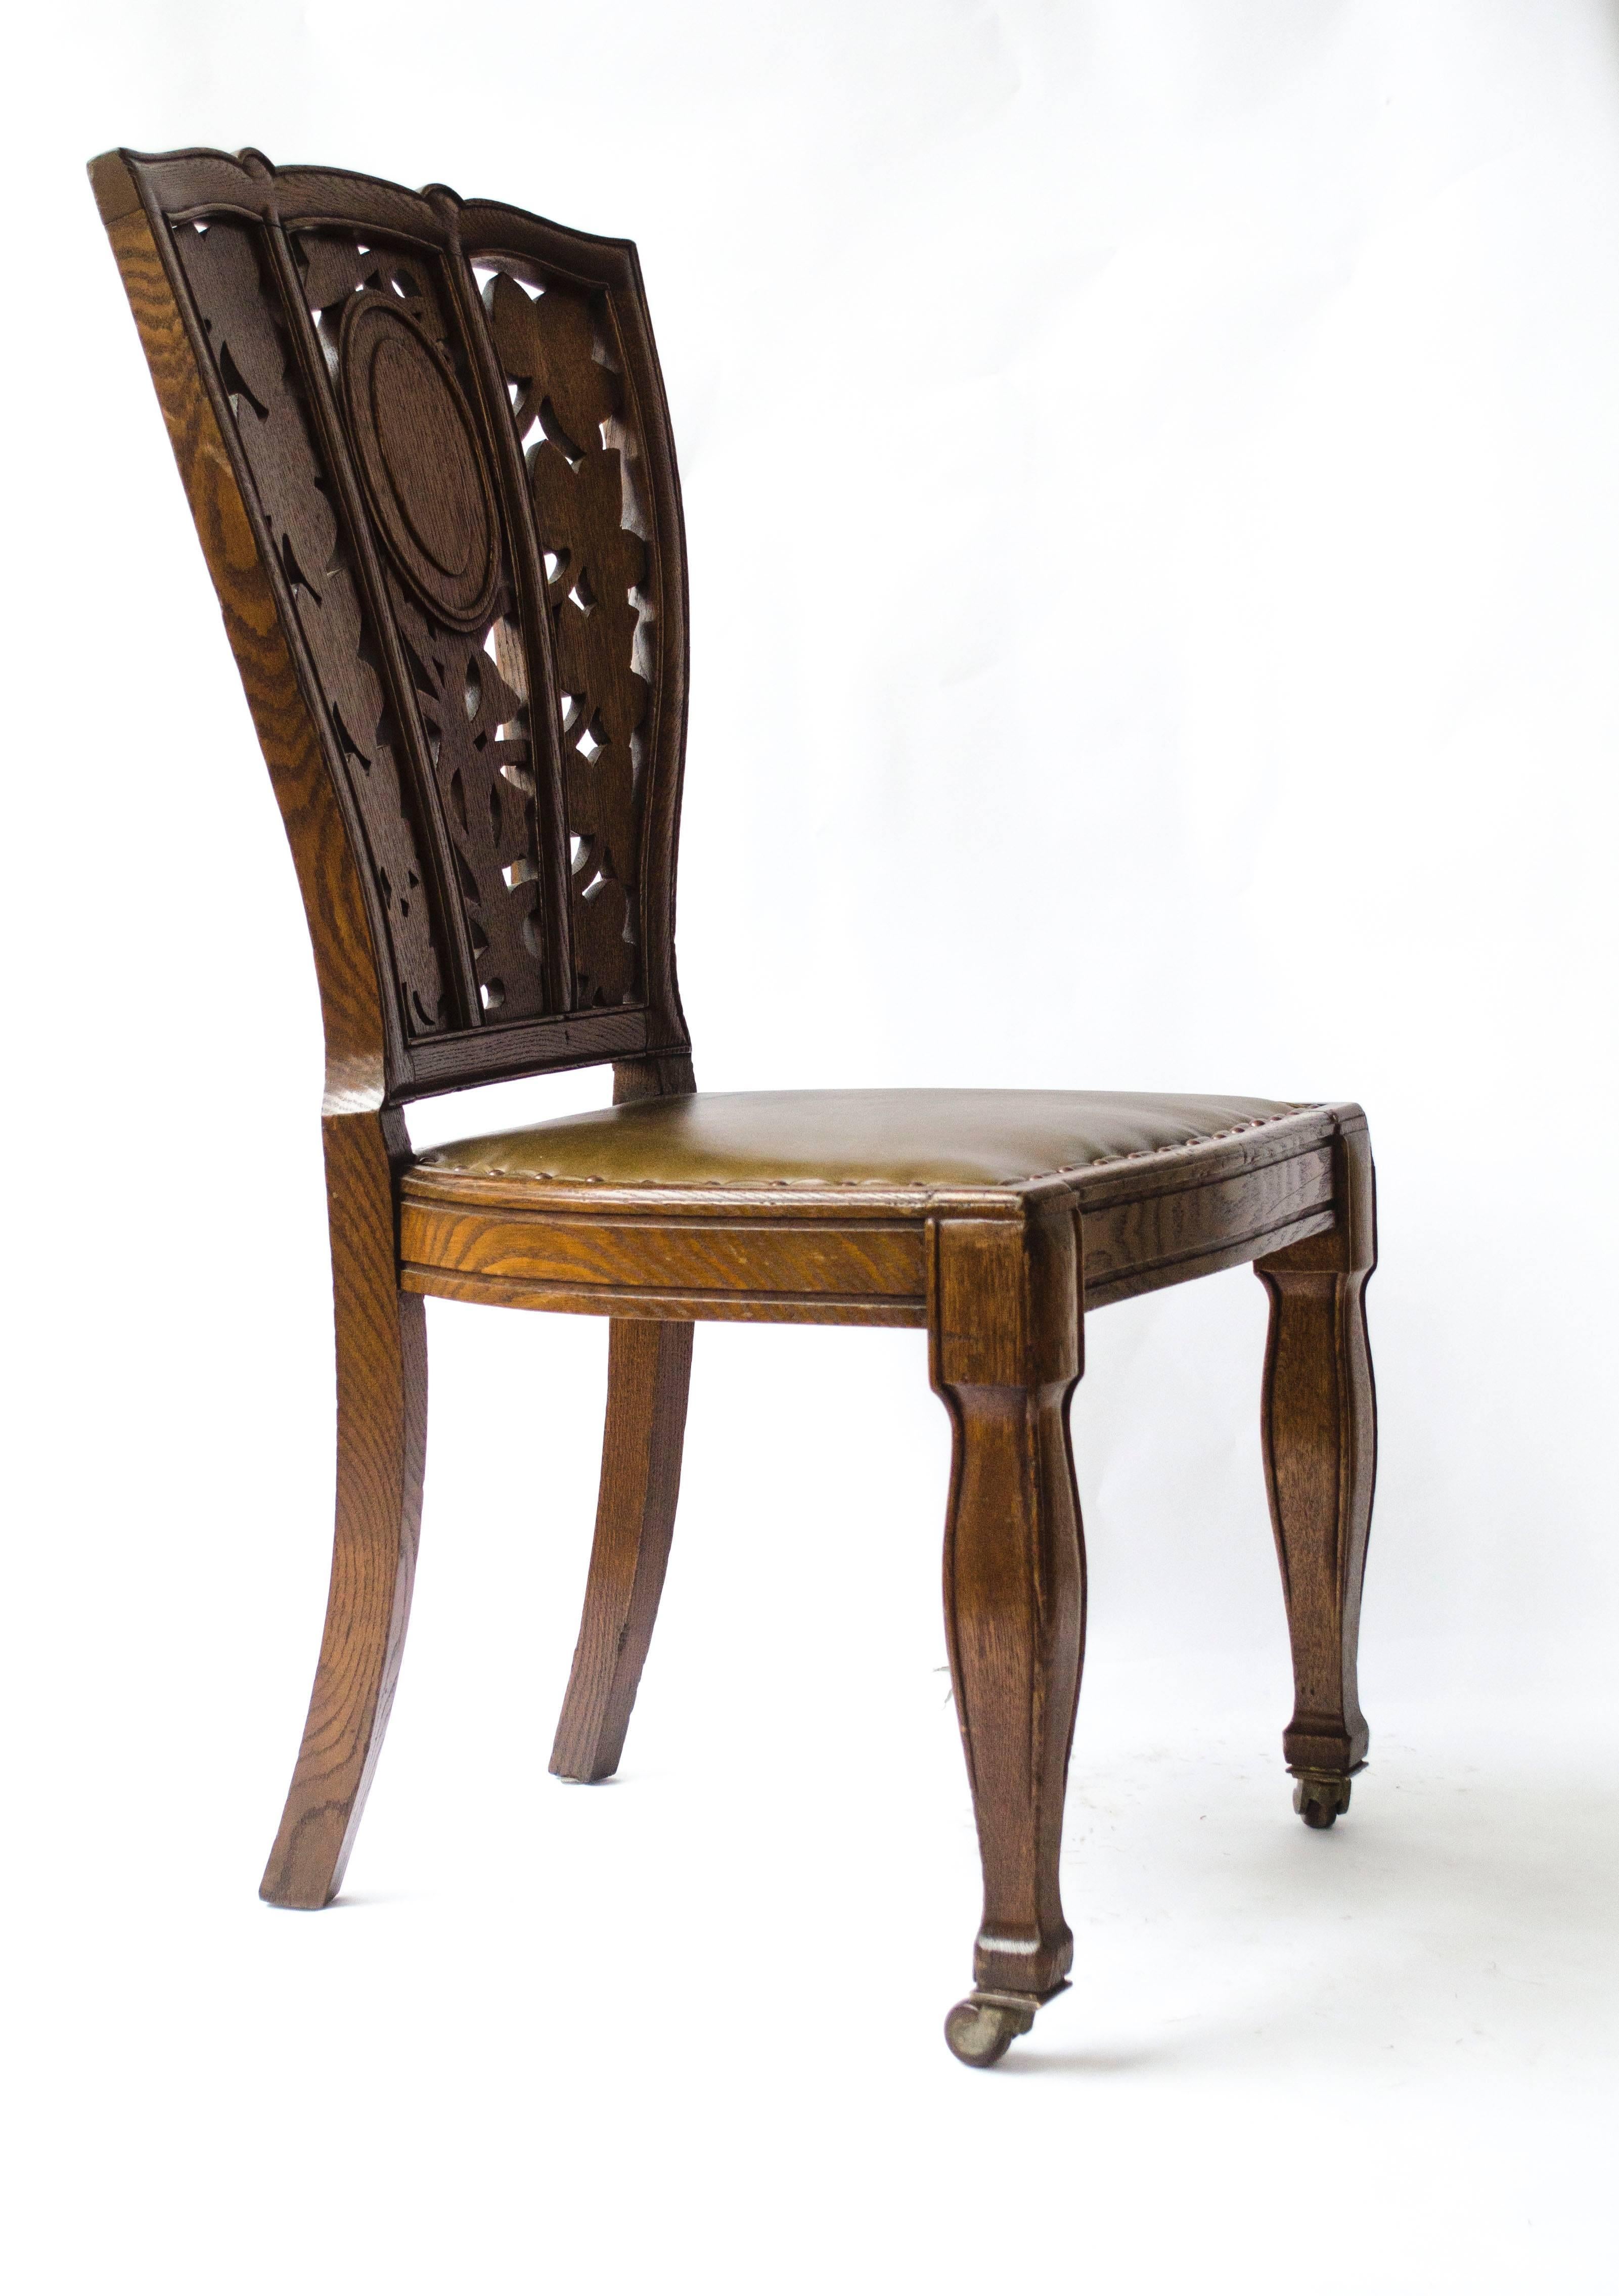 Arthur Heygate Mackmurdo (1851-1942), a highly important oak chair, with an Art Nouveau floral back.
Mackmurdo's influence in Europe is recognized as having produced the earliest examples of Art Nouveau, particularly in the styling of a chair-back